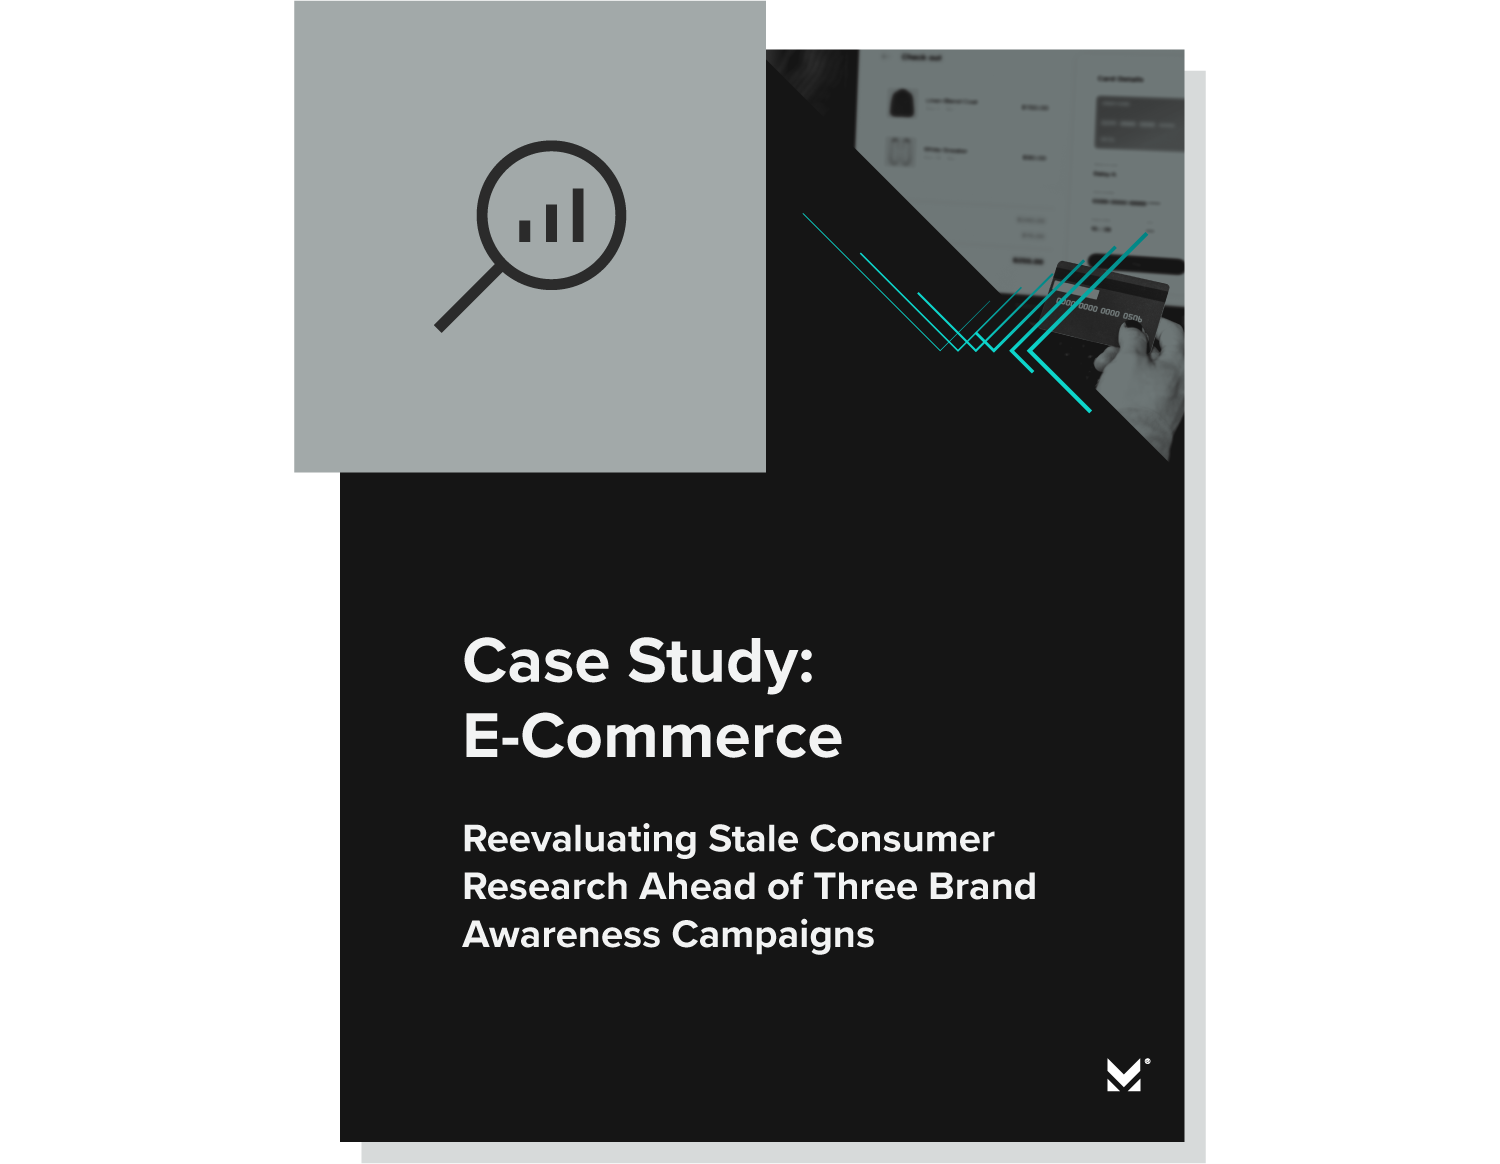 Morning consult case study for retail industry